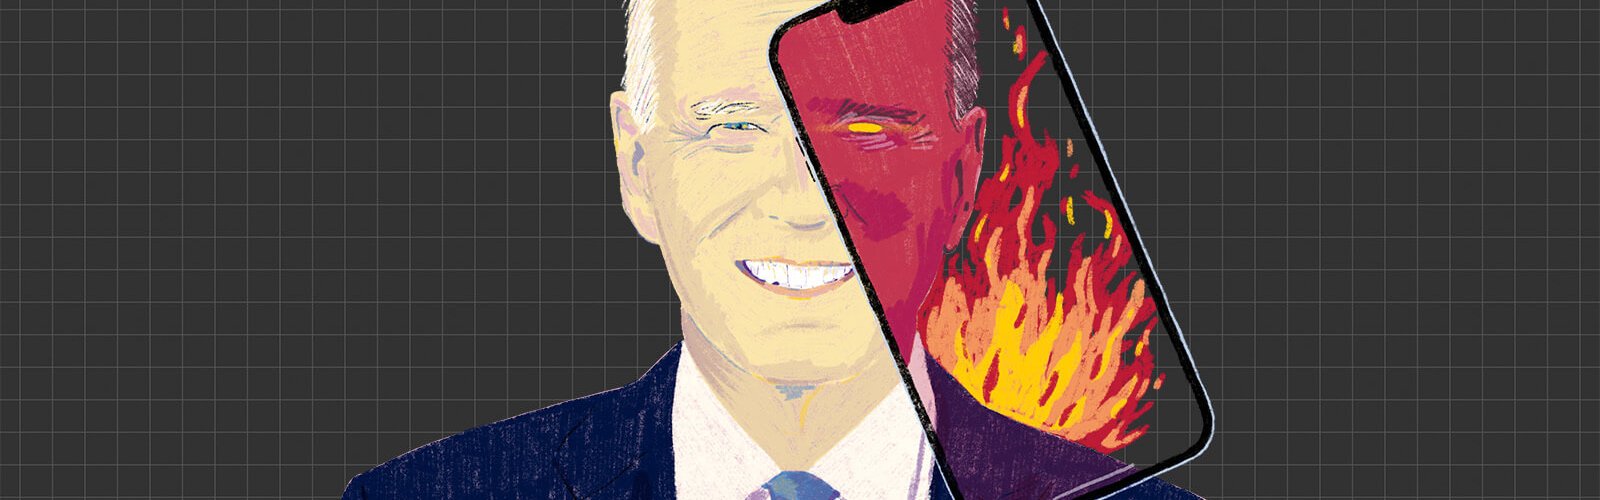 Illustration of Joe Biden. Half his face is covered by a phone screen showing a malefic version of him, in an allegory to the incendiary image disinformation portrays him.